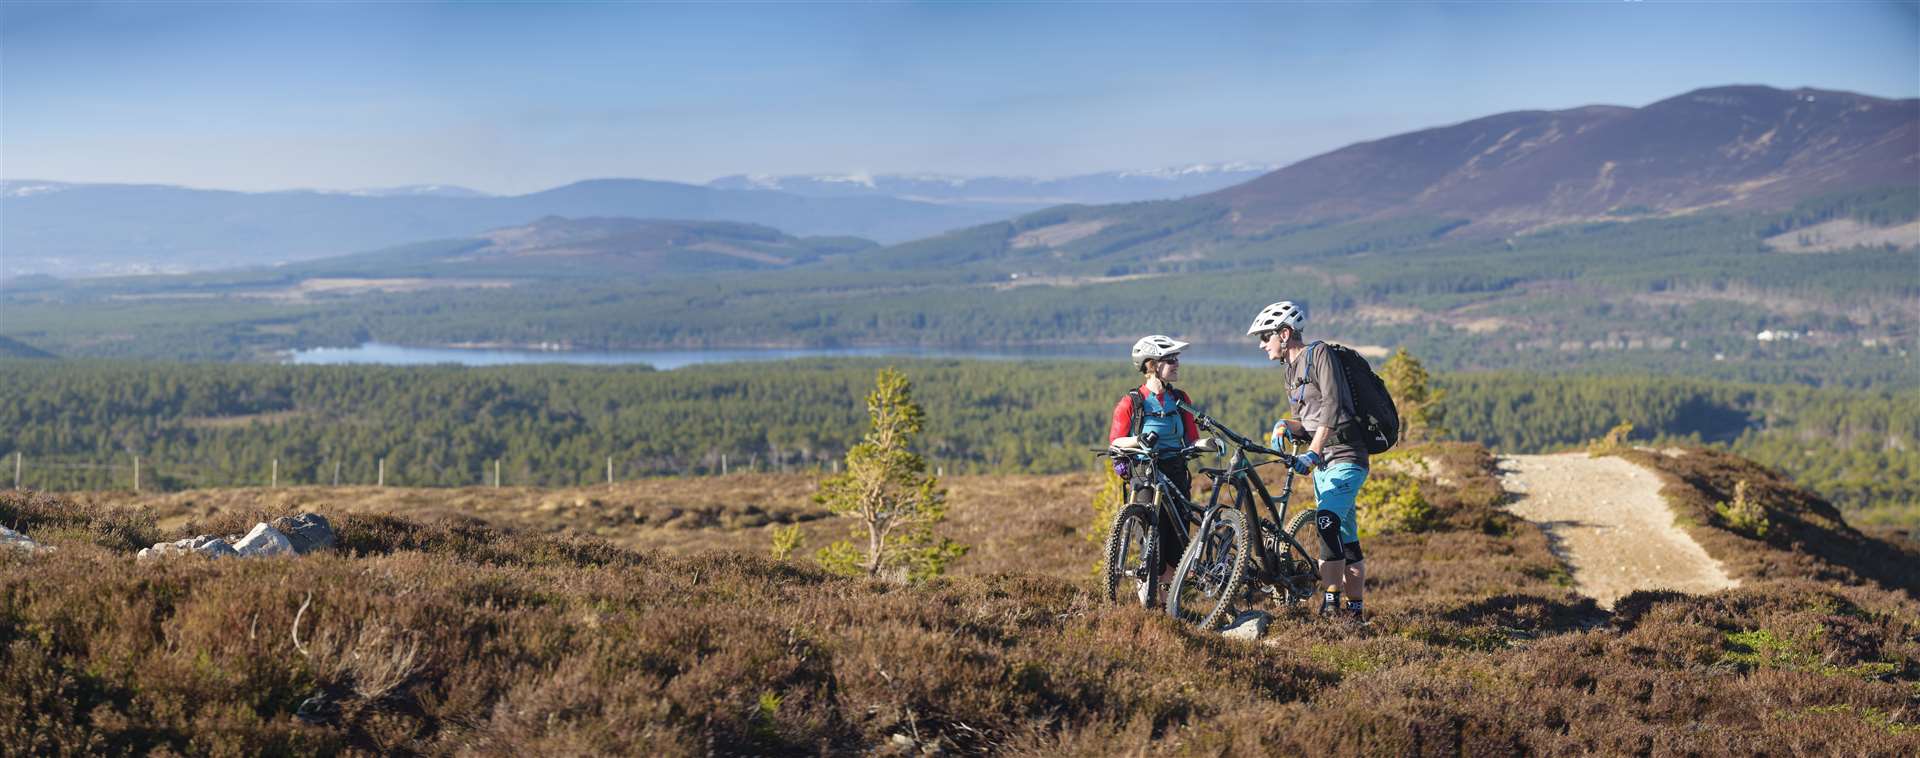 Digital tourism in the Cairngorm National Park in the Scottish Highlands. Picture: Tim Winterburn/HIE